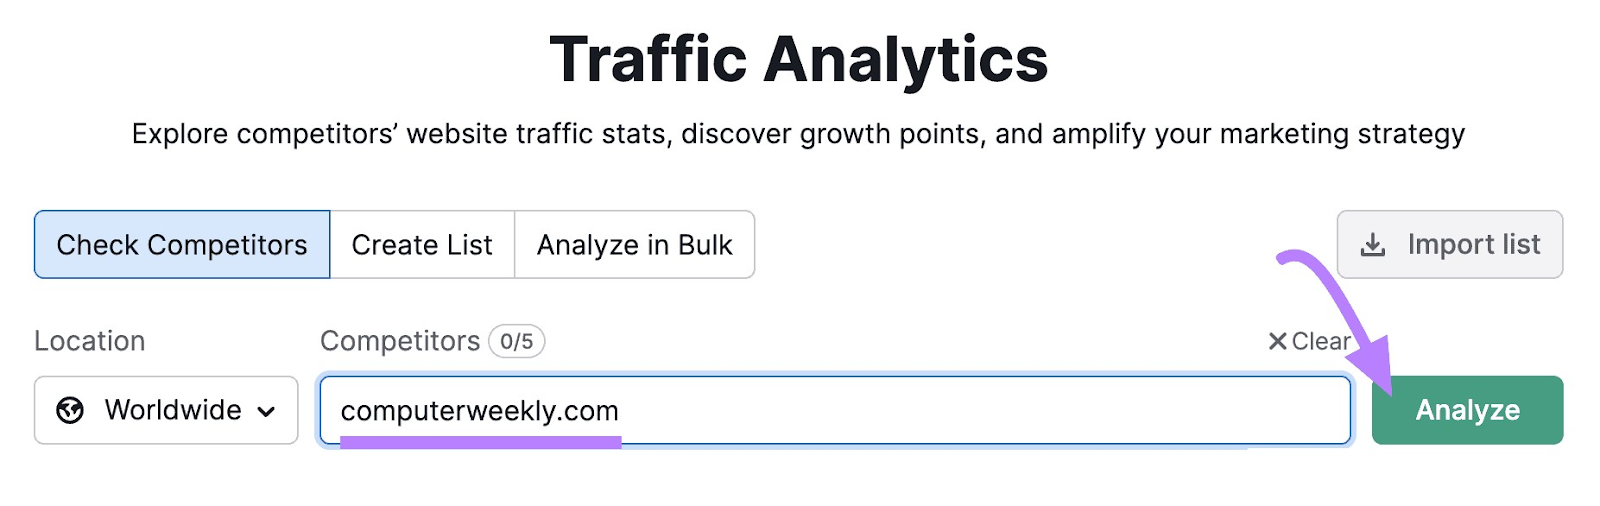 "computerweekly.com" entered into the Traffic Analytics search bar